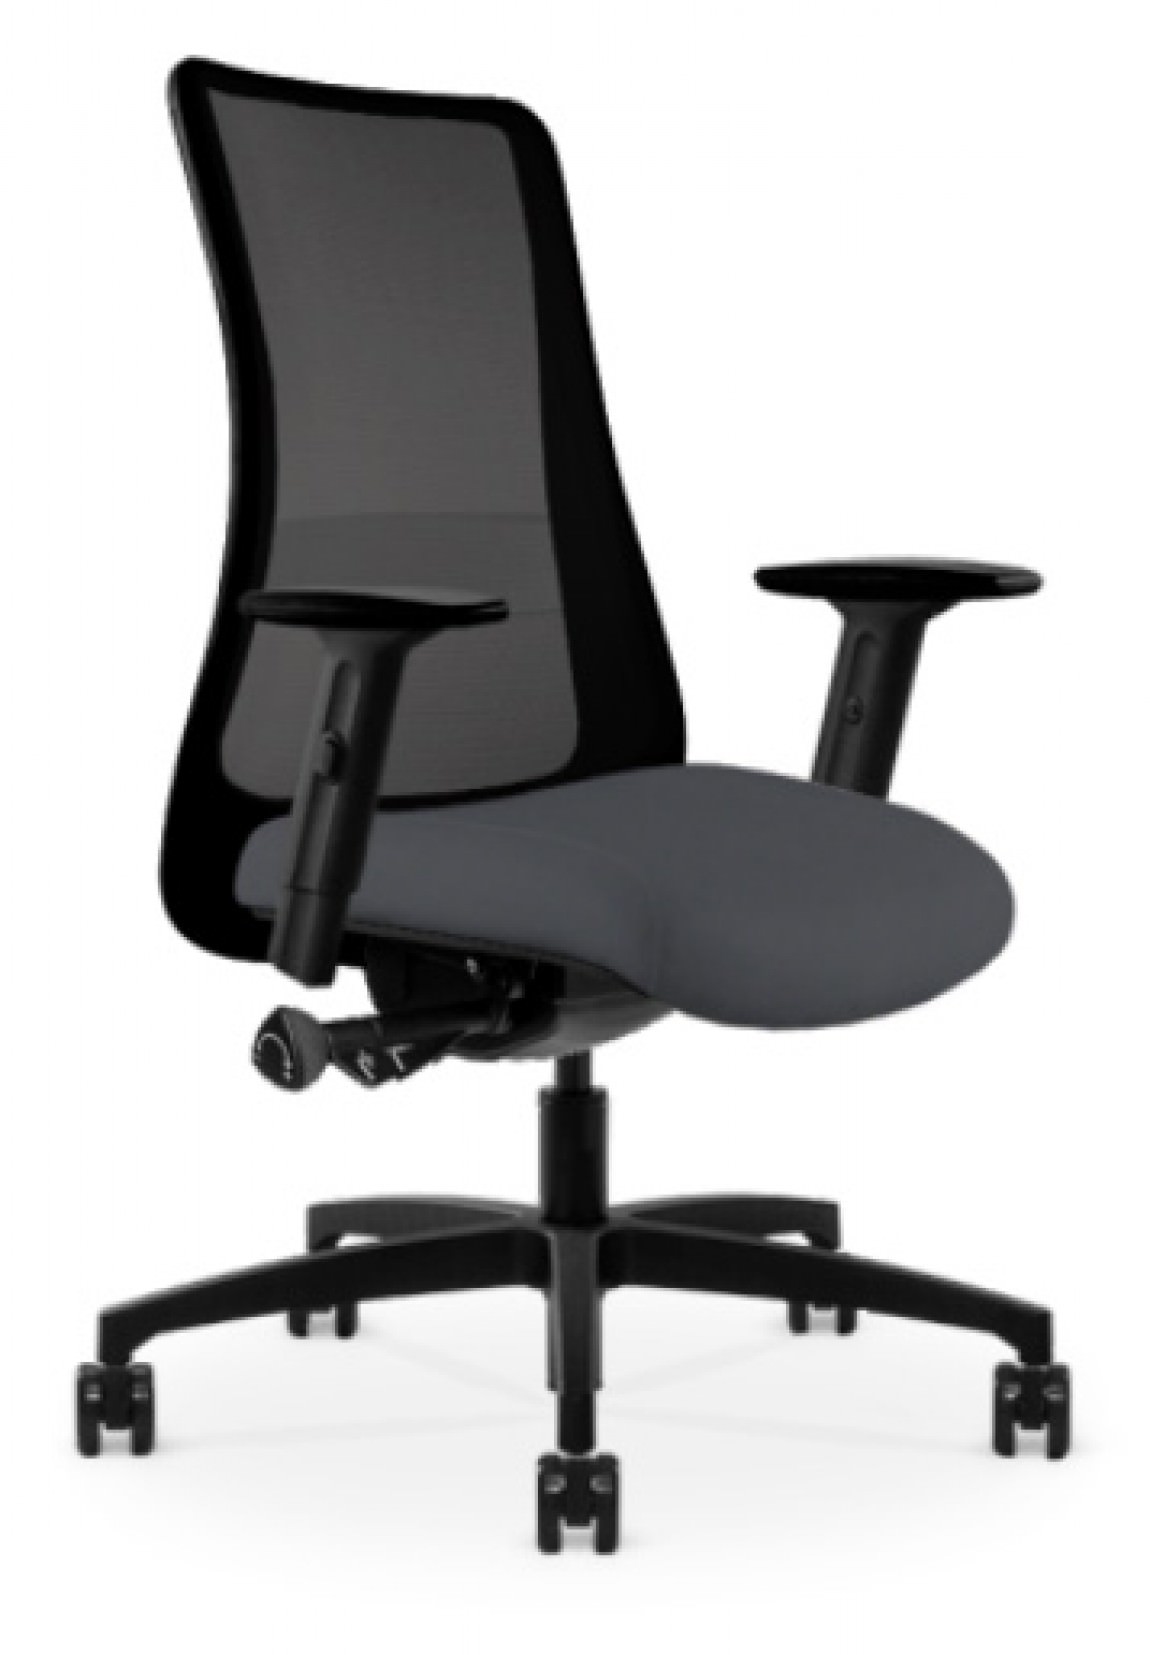 Black Copper Mesh Antimicrobial Office Chair w/ Gray Seat